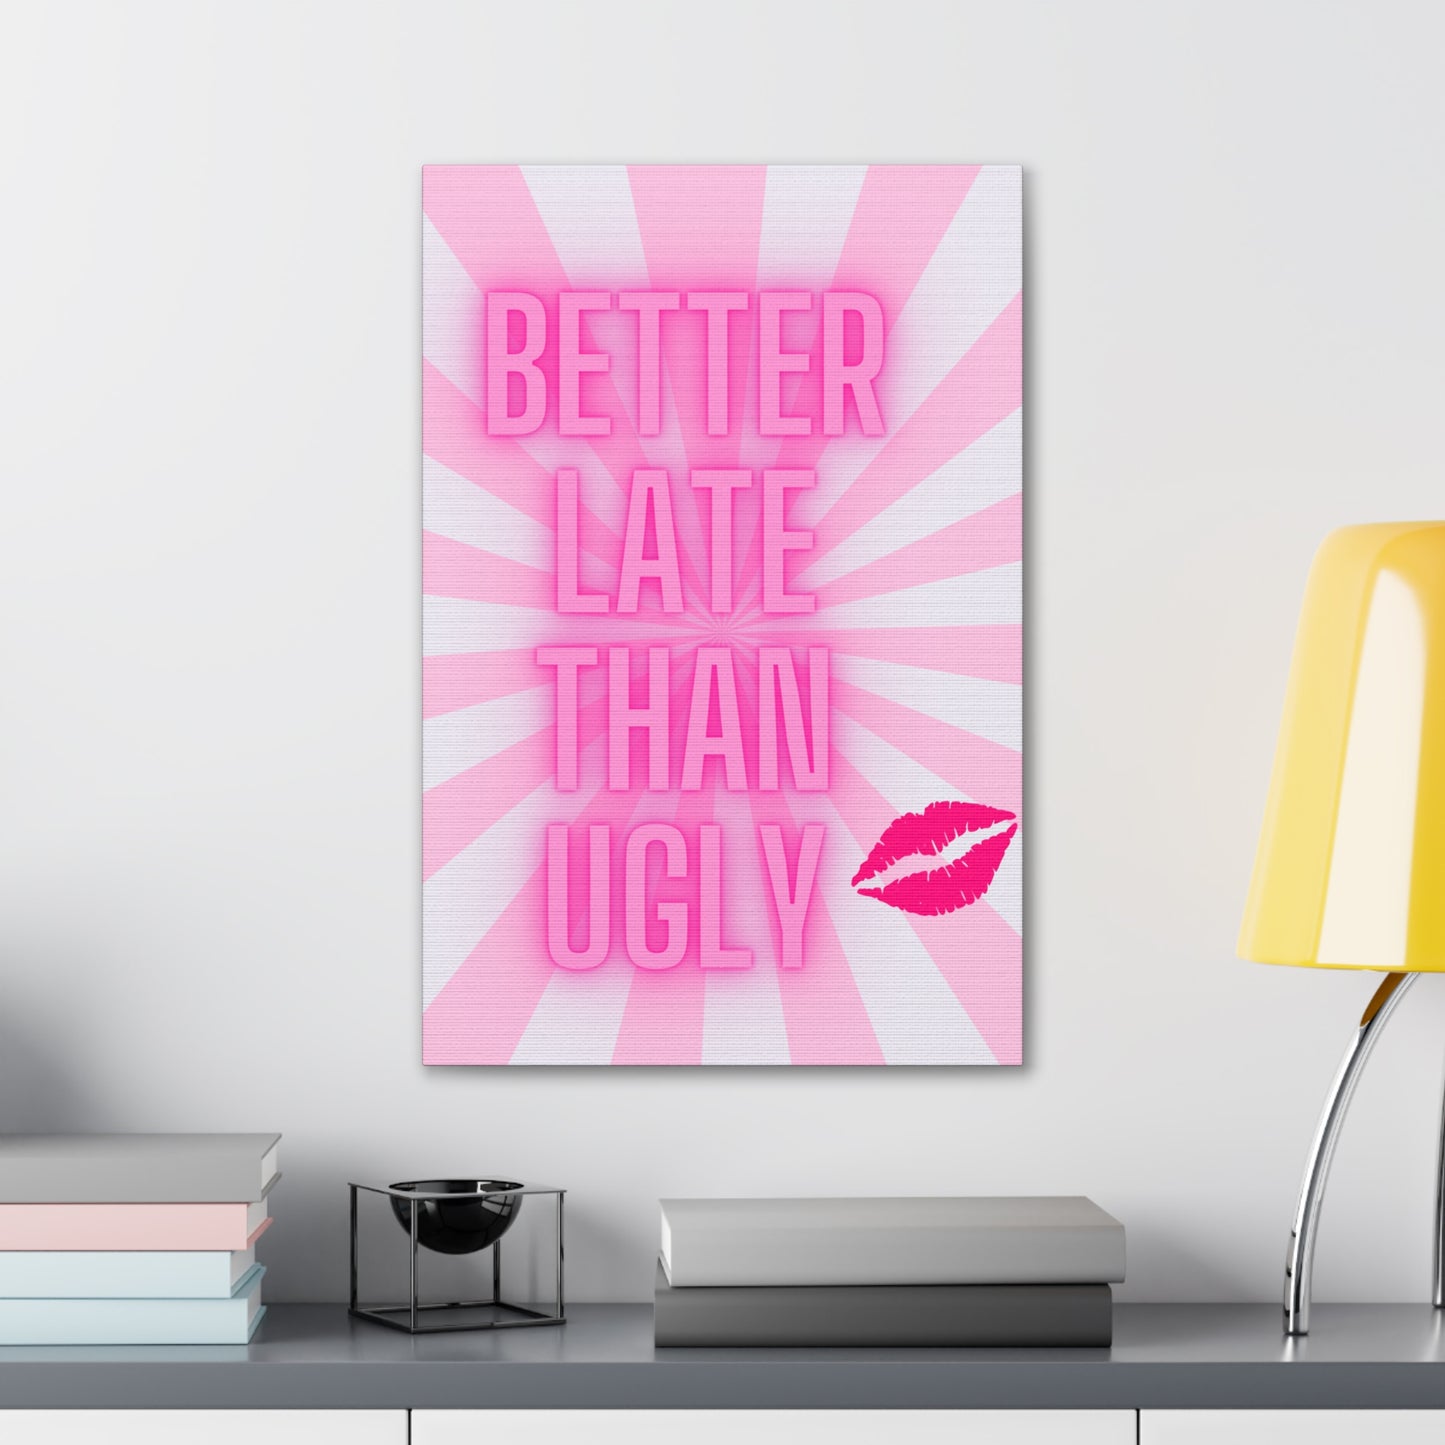 Glow Pink Better Late Than Ugly Wrapped Canvas Art Multiple Sizes